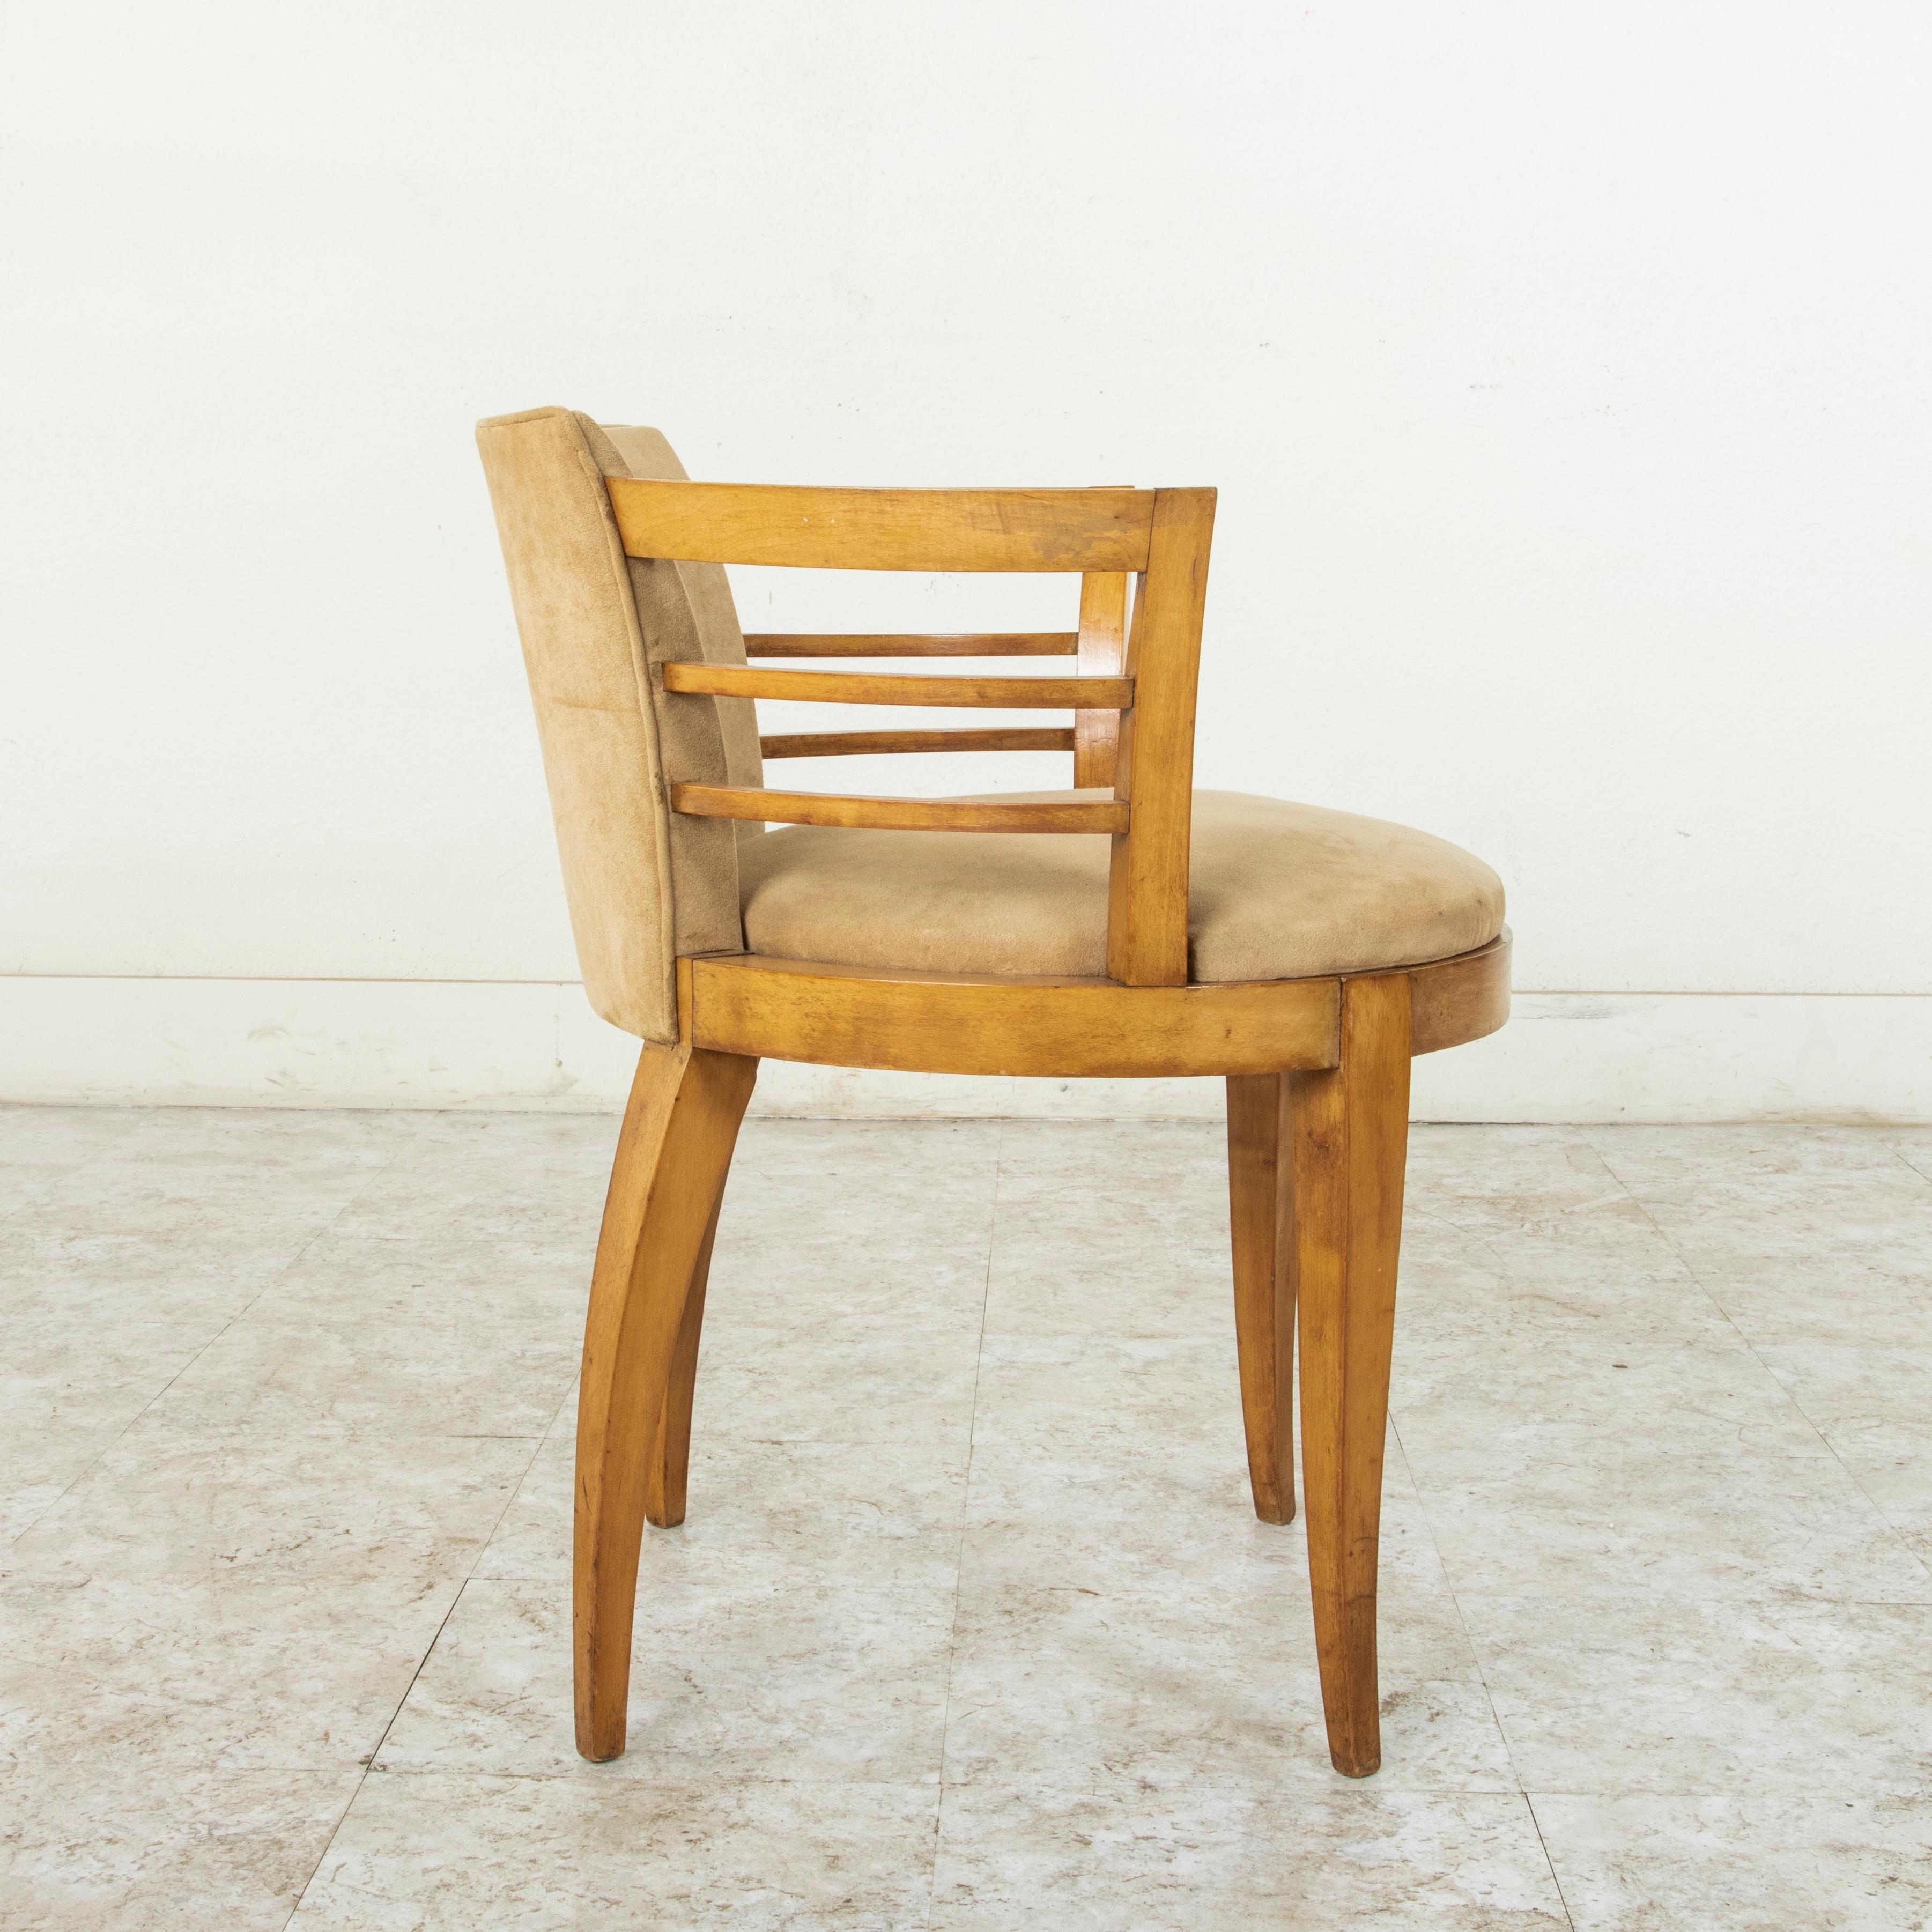 Early 20th Century French Art Deco Period Lemon Wood Armchair or Bergère 1